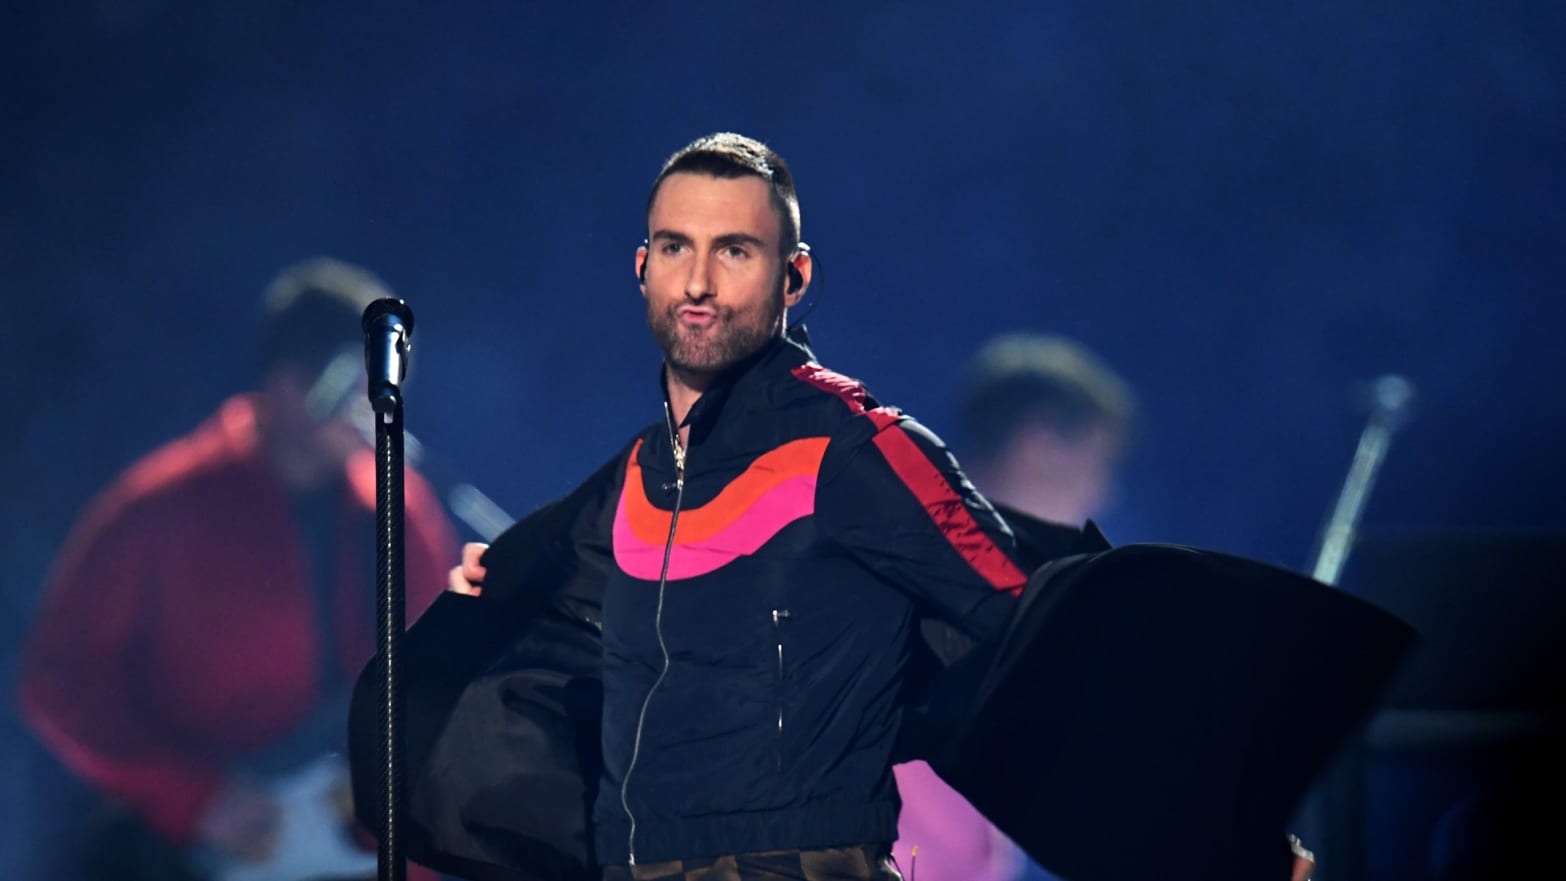 2019 Super Bowl's Halftime Show: Maroon 5, Adam Levine Dragged on Twitter